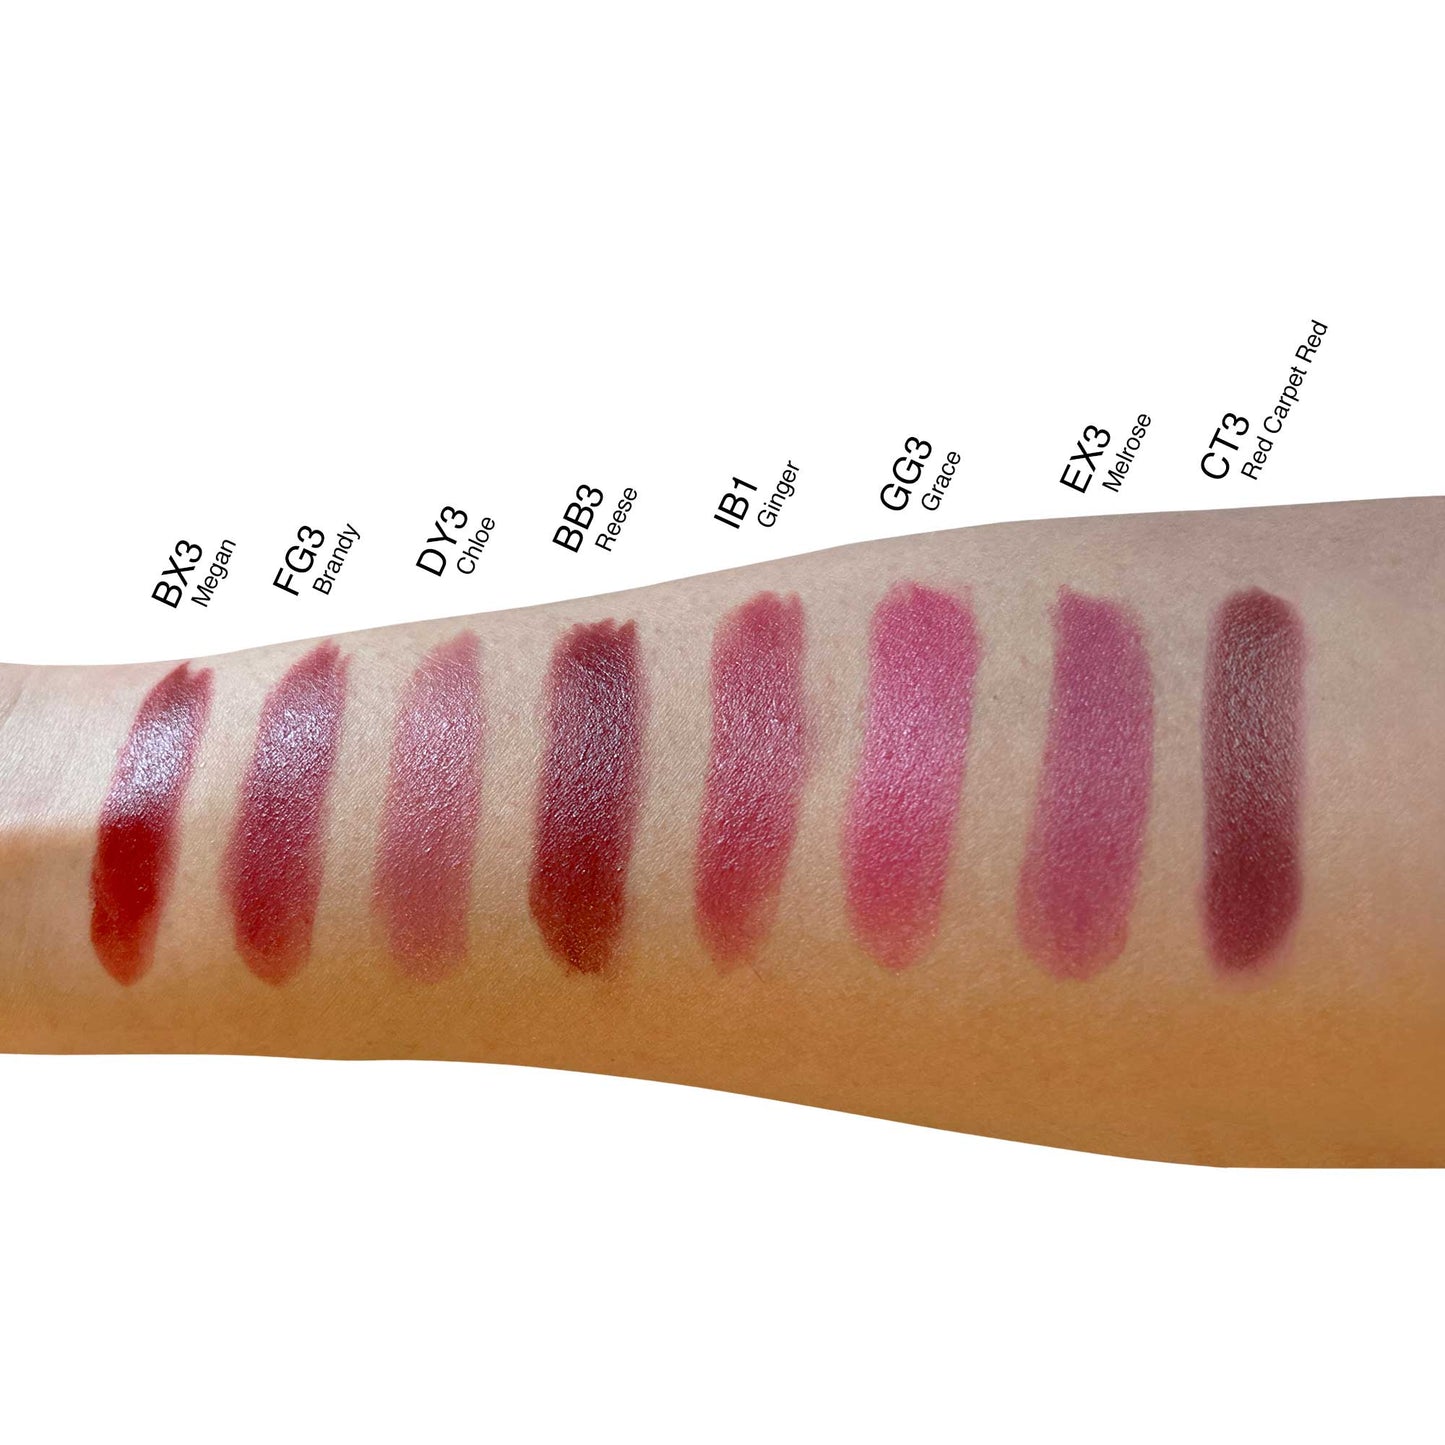 Megan matte lipstick by Cruisin Organics. Find out what Cruisin Organics Matte Lipsticks are all about. For naturally gorgeous lips, these nine shades provide vibrant hues and sustained moisture